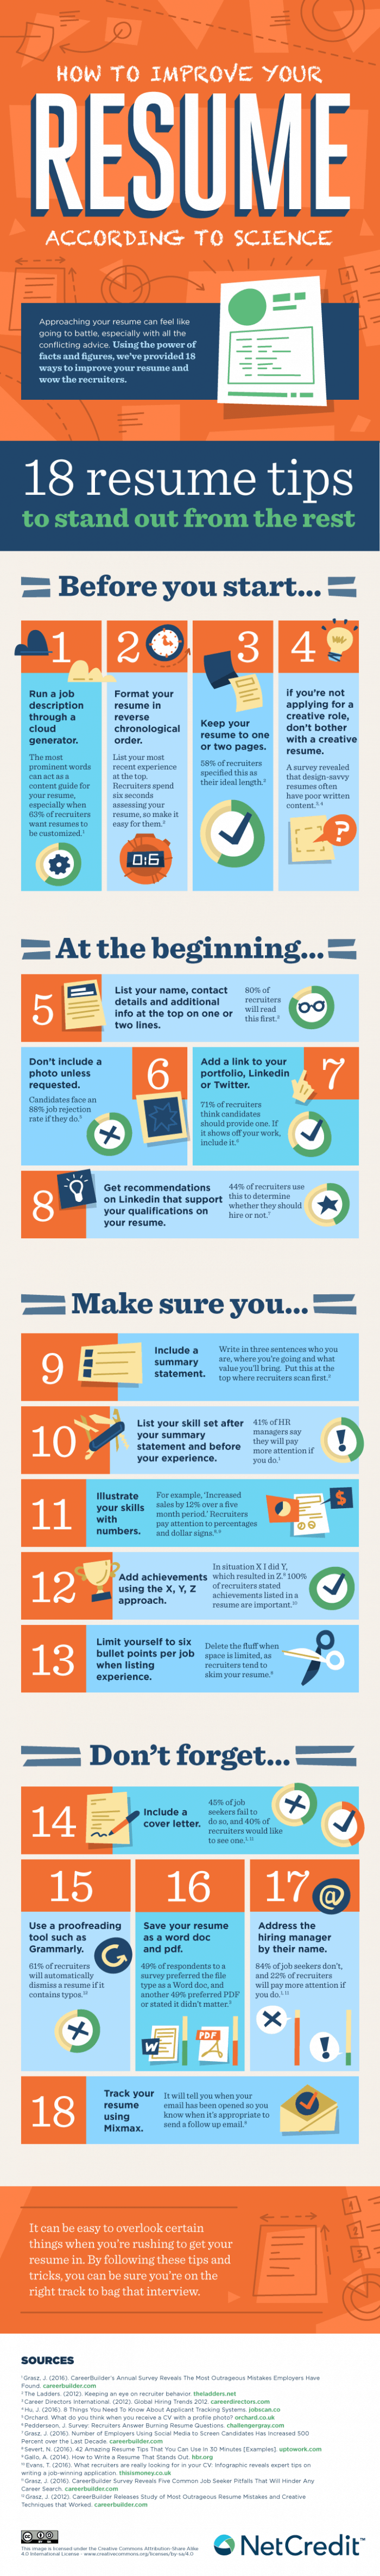 Infographic on how to improve your CV using science data and research.